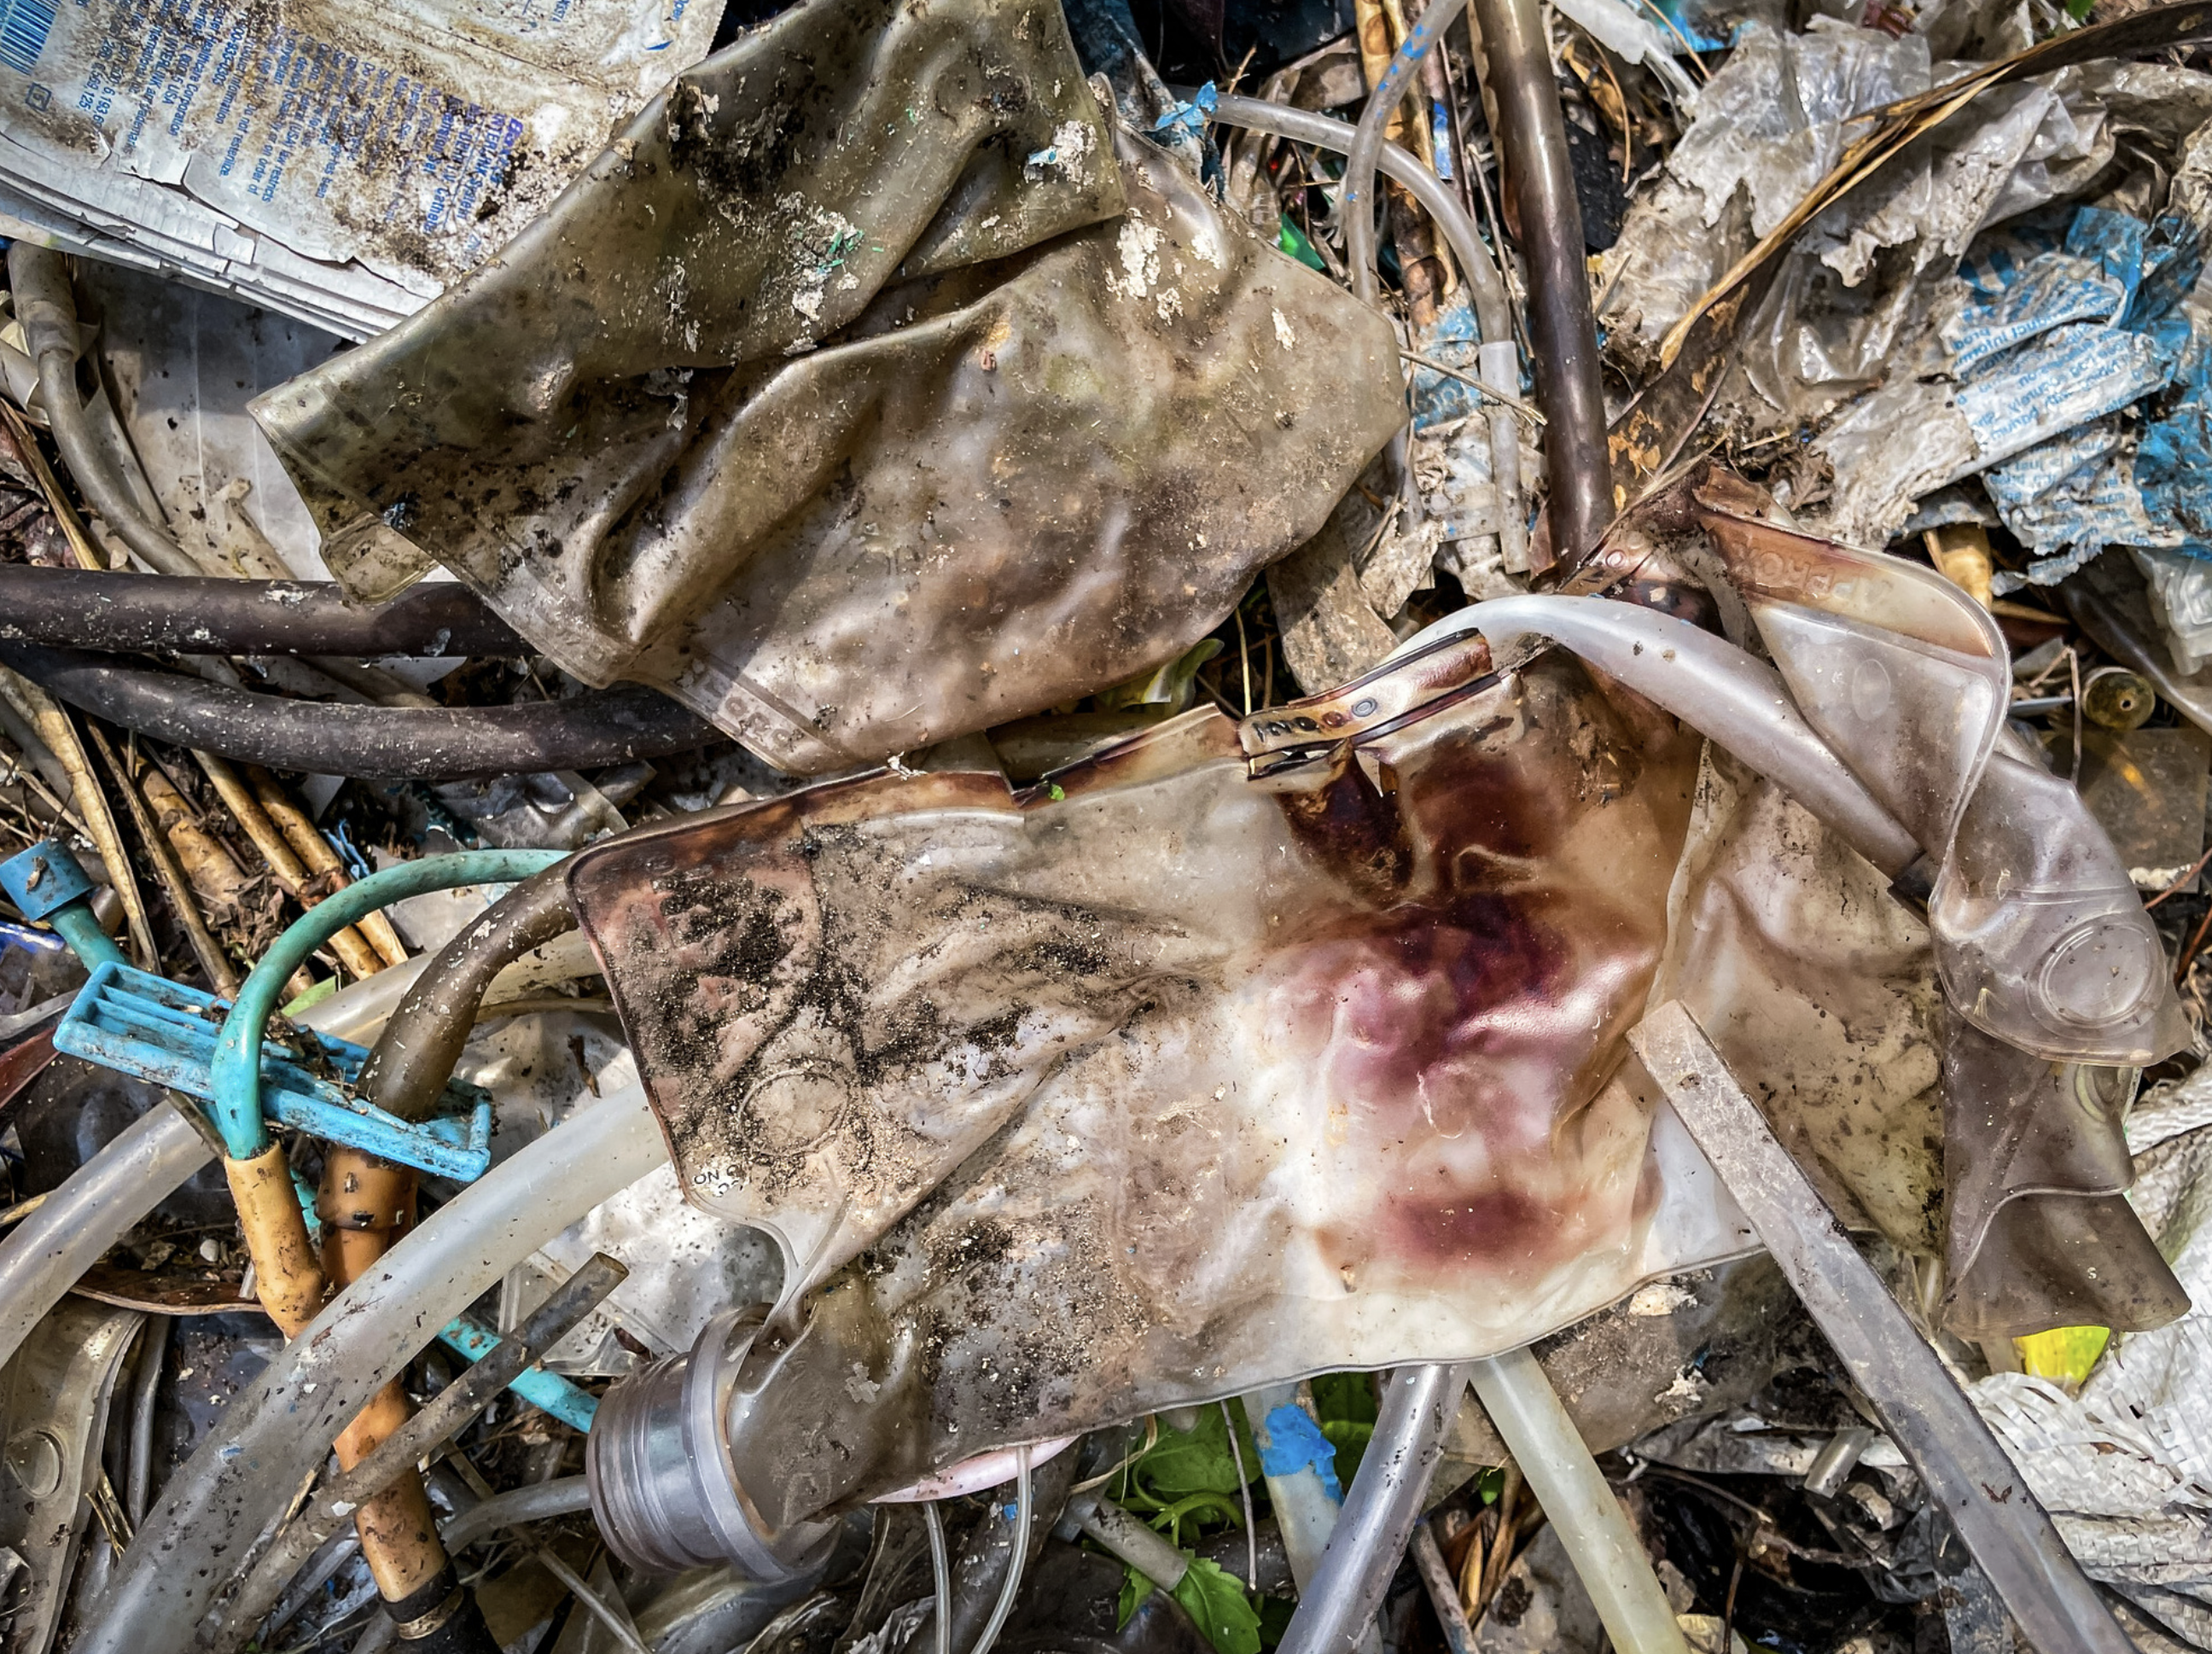 Plastic bags and vials litter an area of land near a swamp in Binh Tan District. Photo: Ngoc Khai / Tuoi Tre